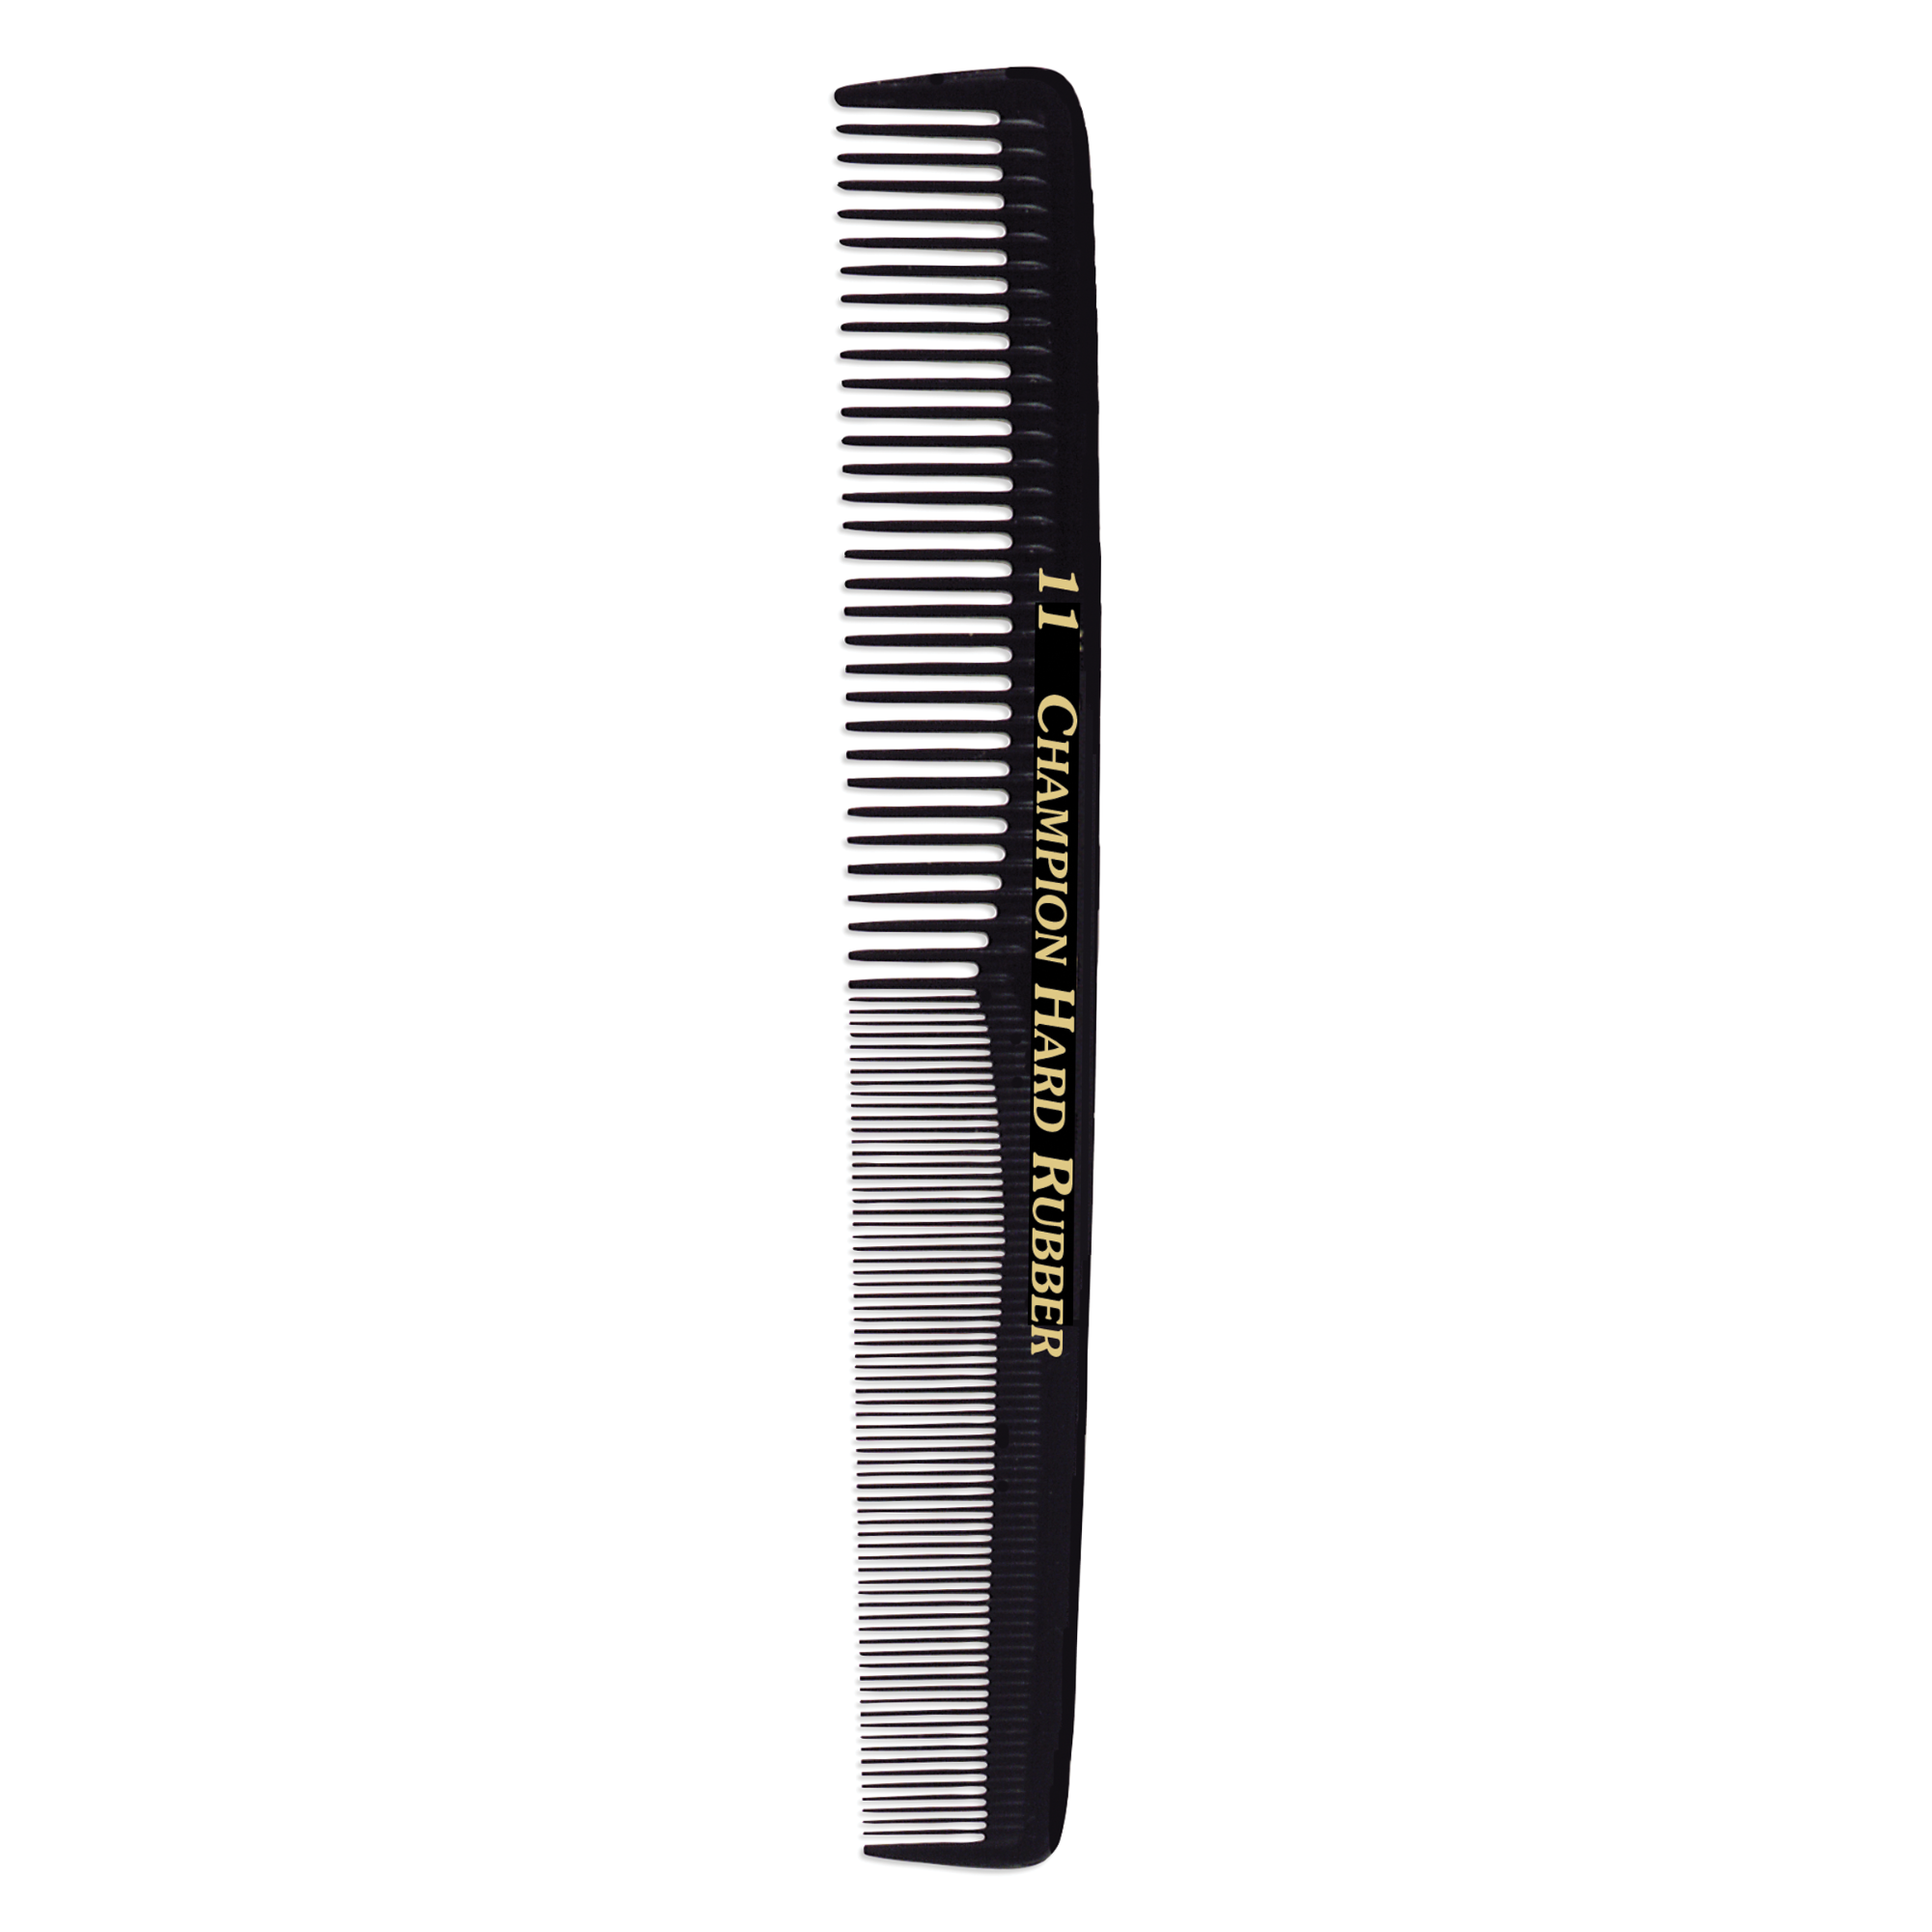 Hard Rubber Styling Comb - 7"